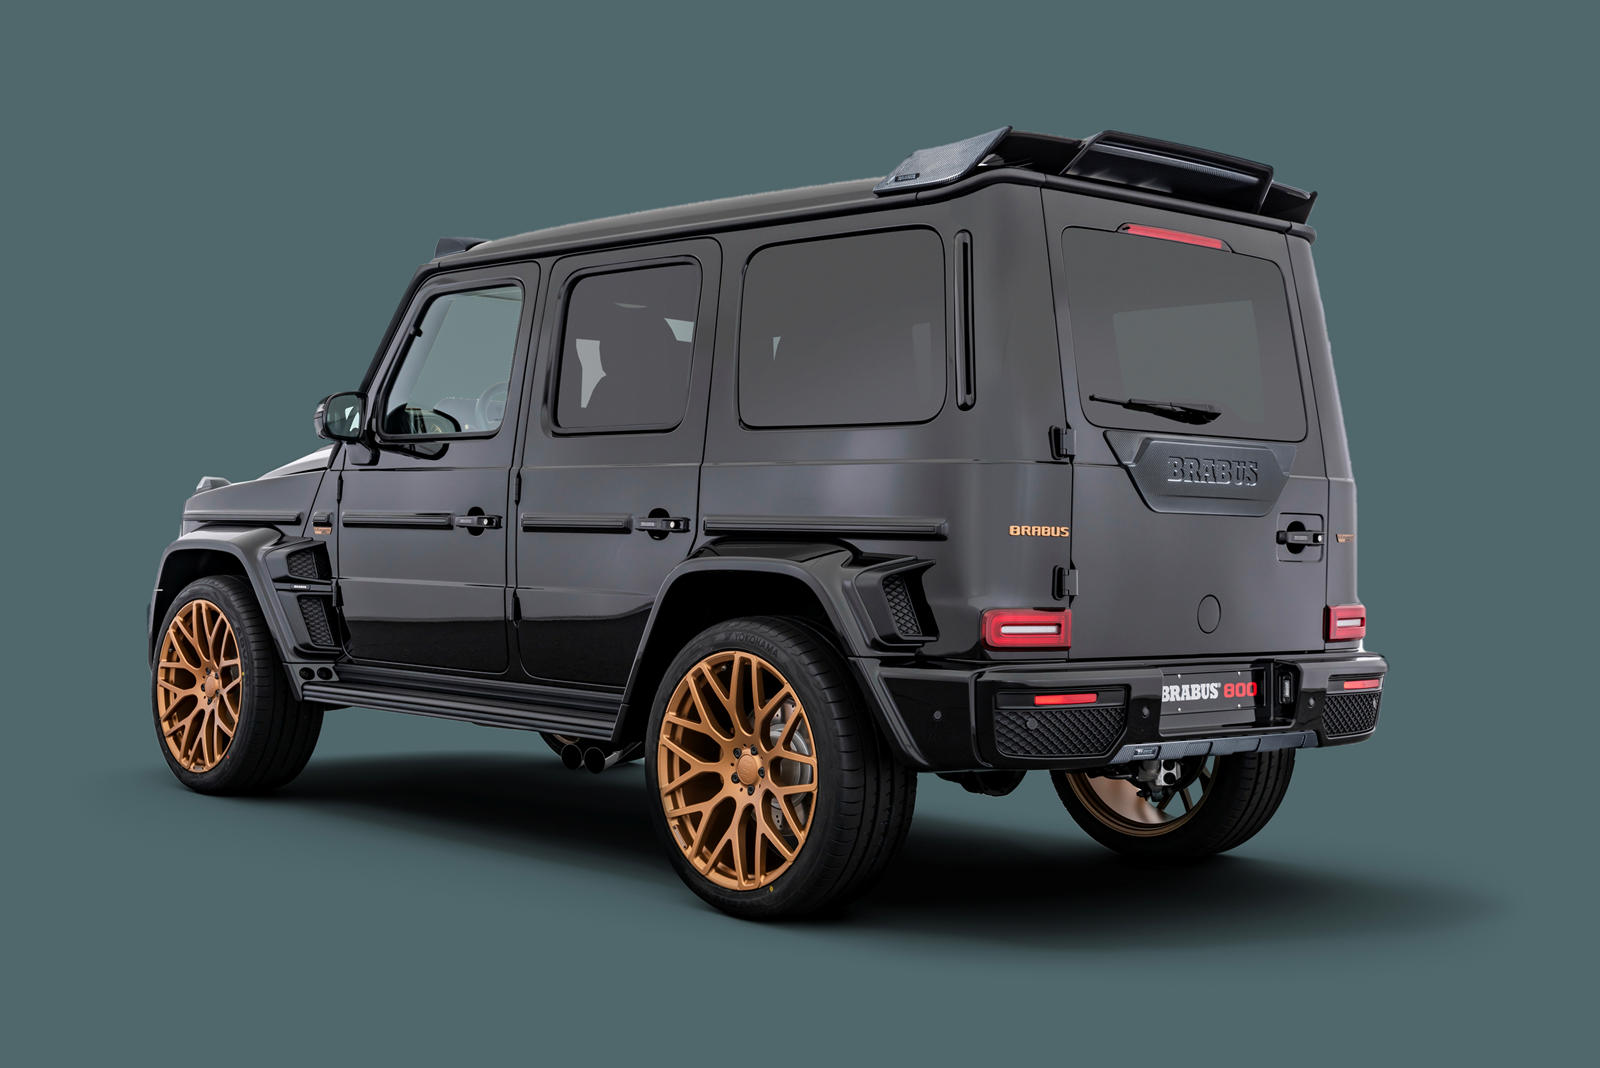 800-HP Mercedes-AMG G63 Delivers Supercar Performance